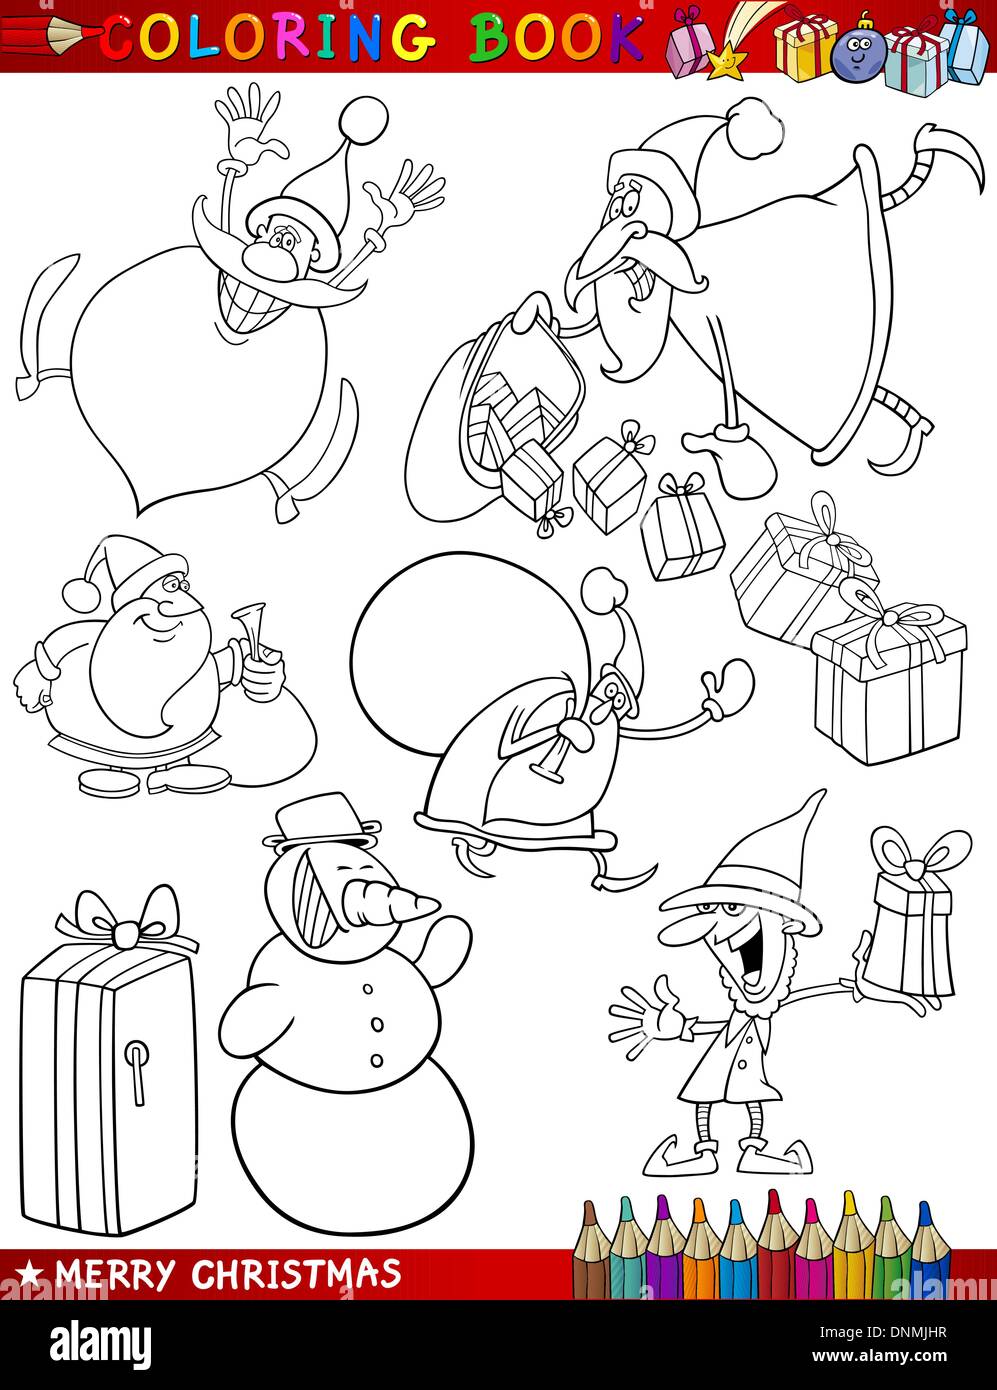 Download Coloring Book Or Page Cartoon Illustration Of Christmas Themes With Santa Claus Or Papa Noel And Xmas Decorations And Characters Stock Vector Image Art Alamy